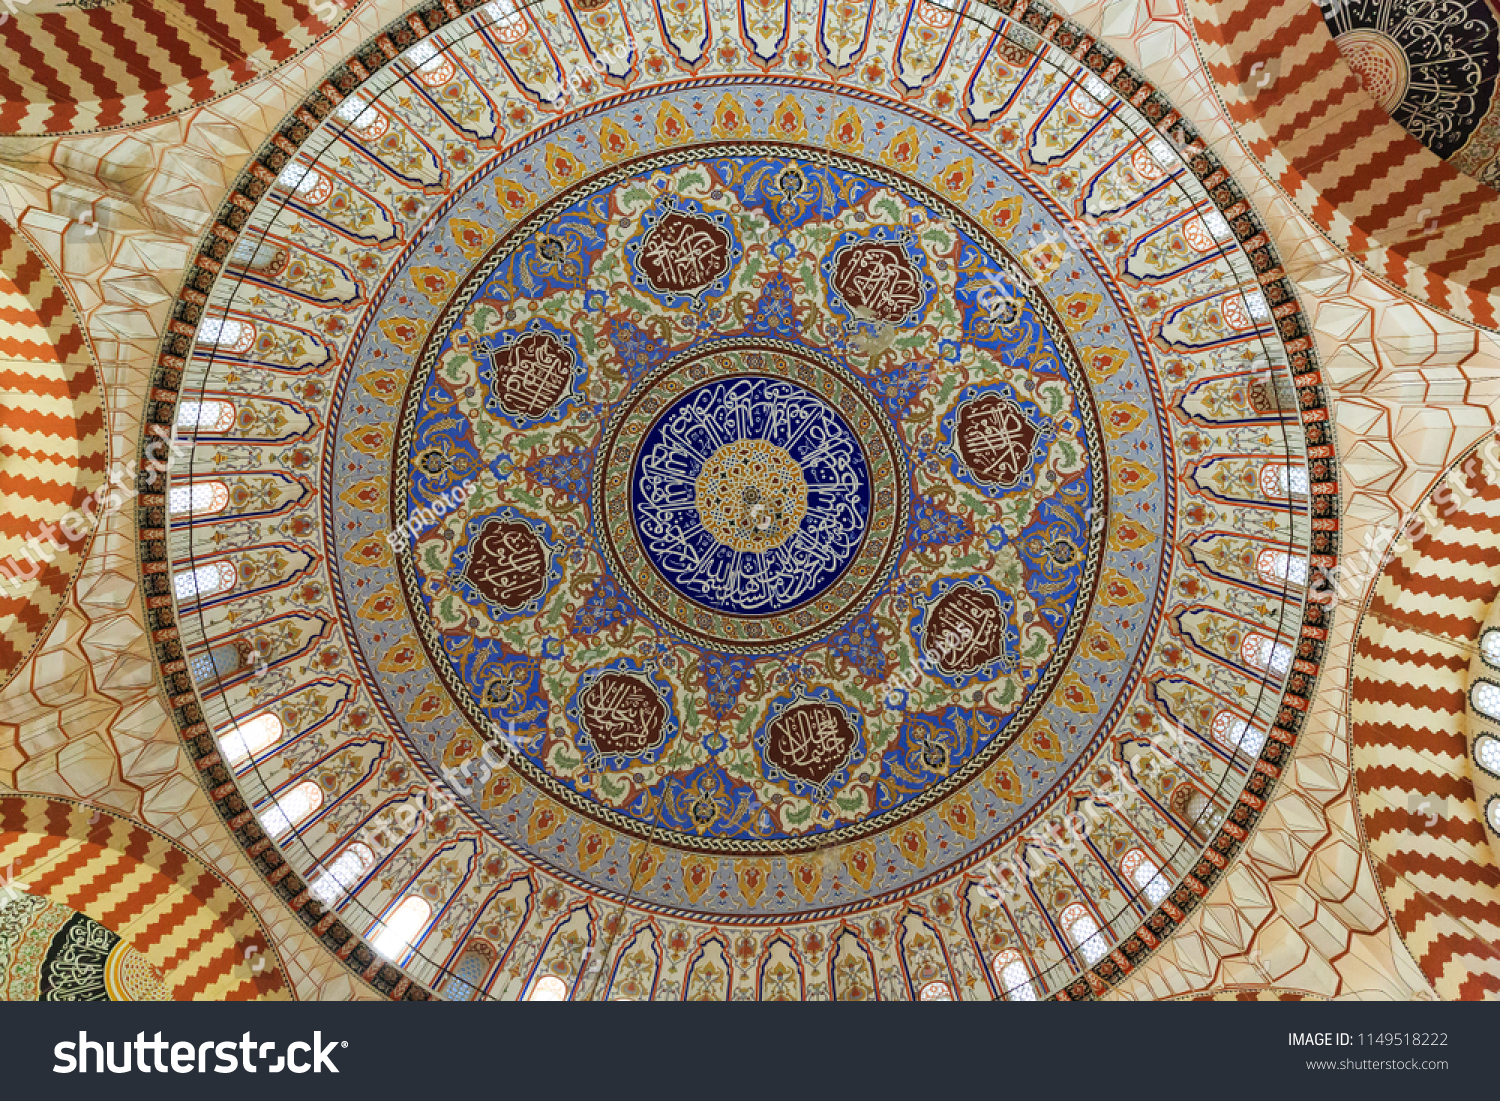 Mosque Ceiling in Istanbul #1149518222